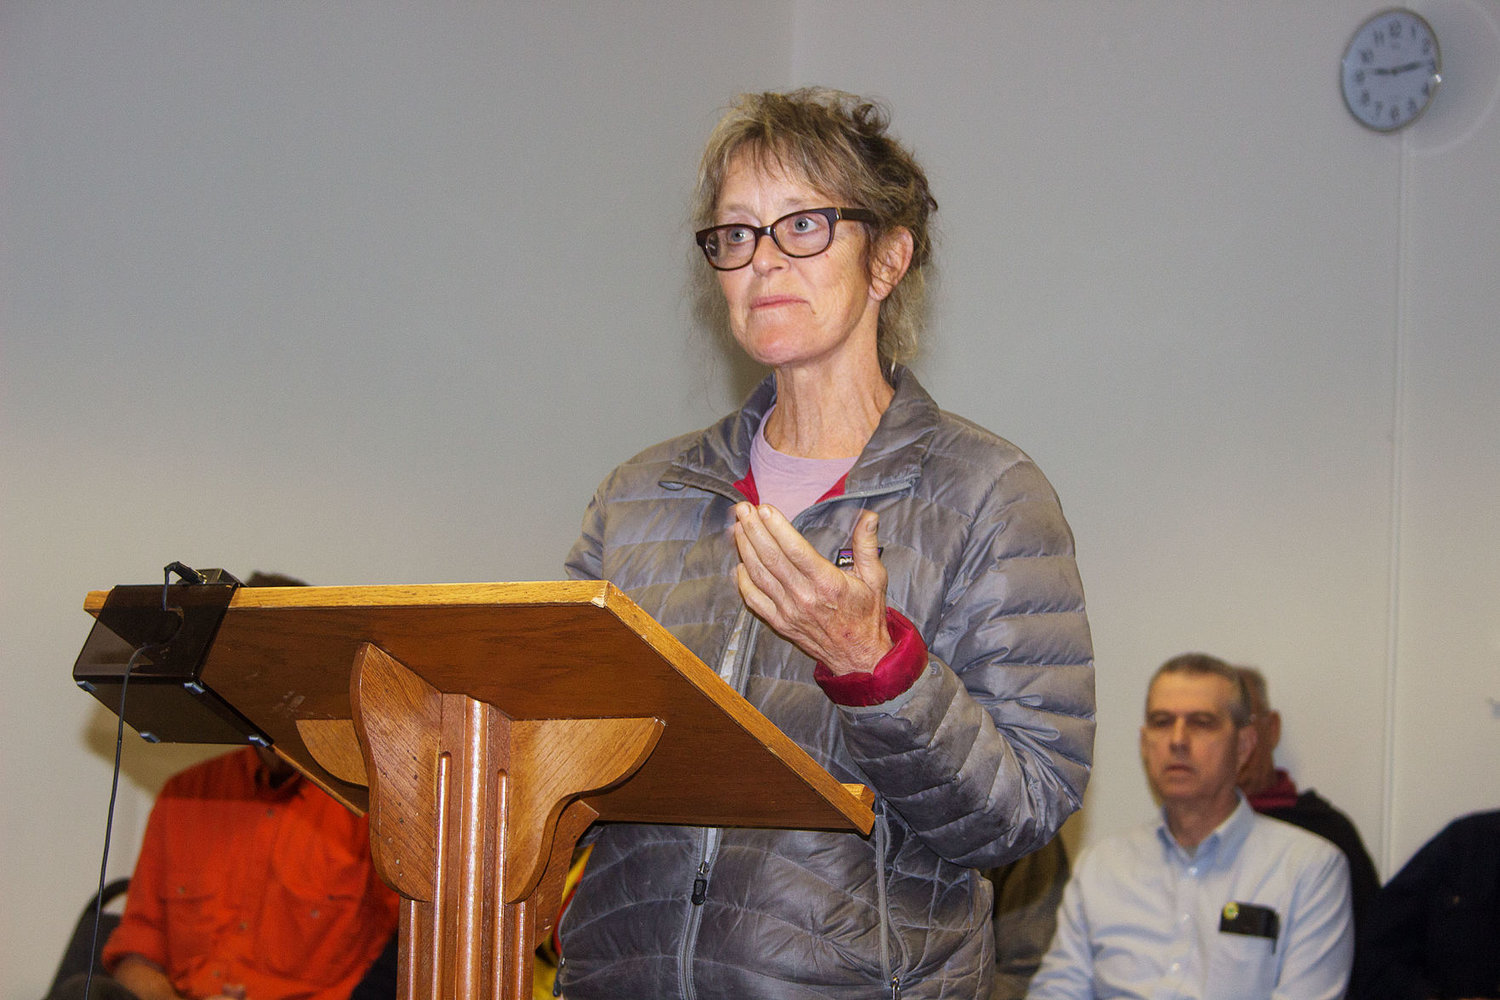 Teri Hein, a resident of Tarboo Valley, spoke out against a proposed shooting range in her area to the Jefferson County commissioners on both Sept. 11 and 18. Photo by Kirk Boxleitner